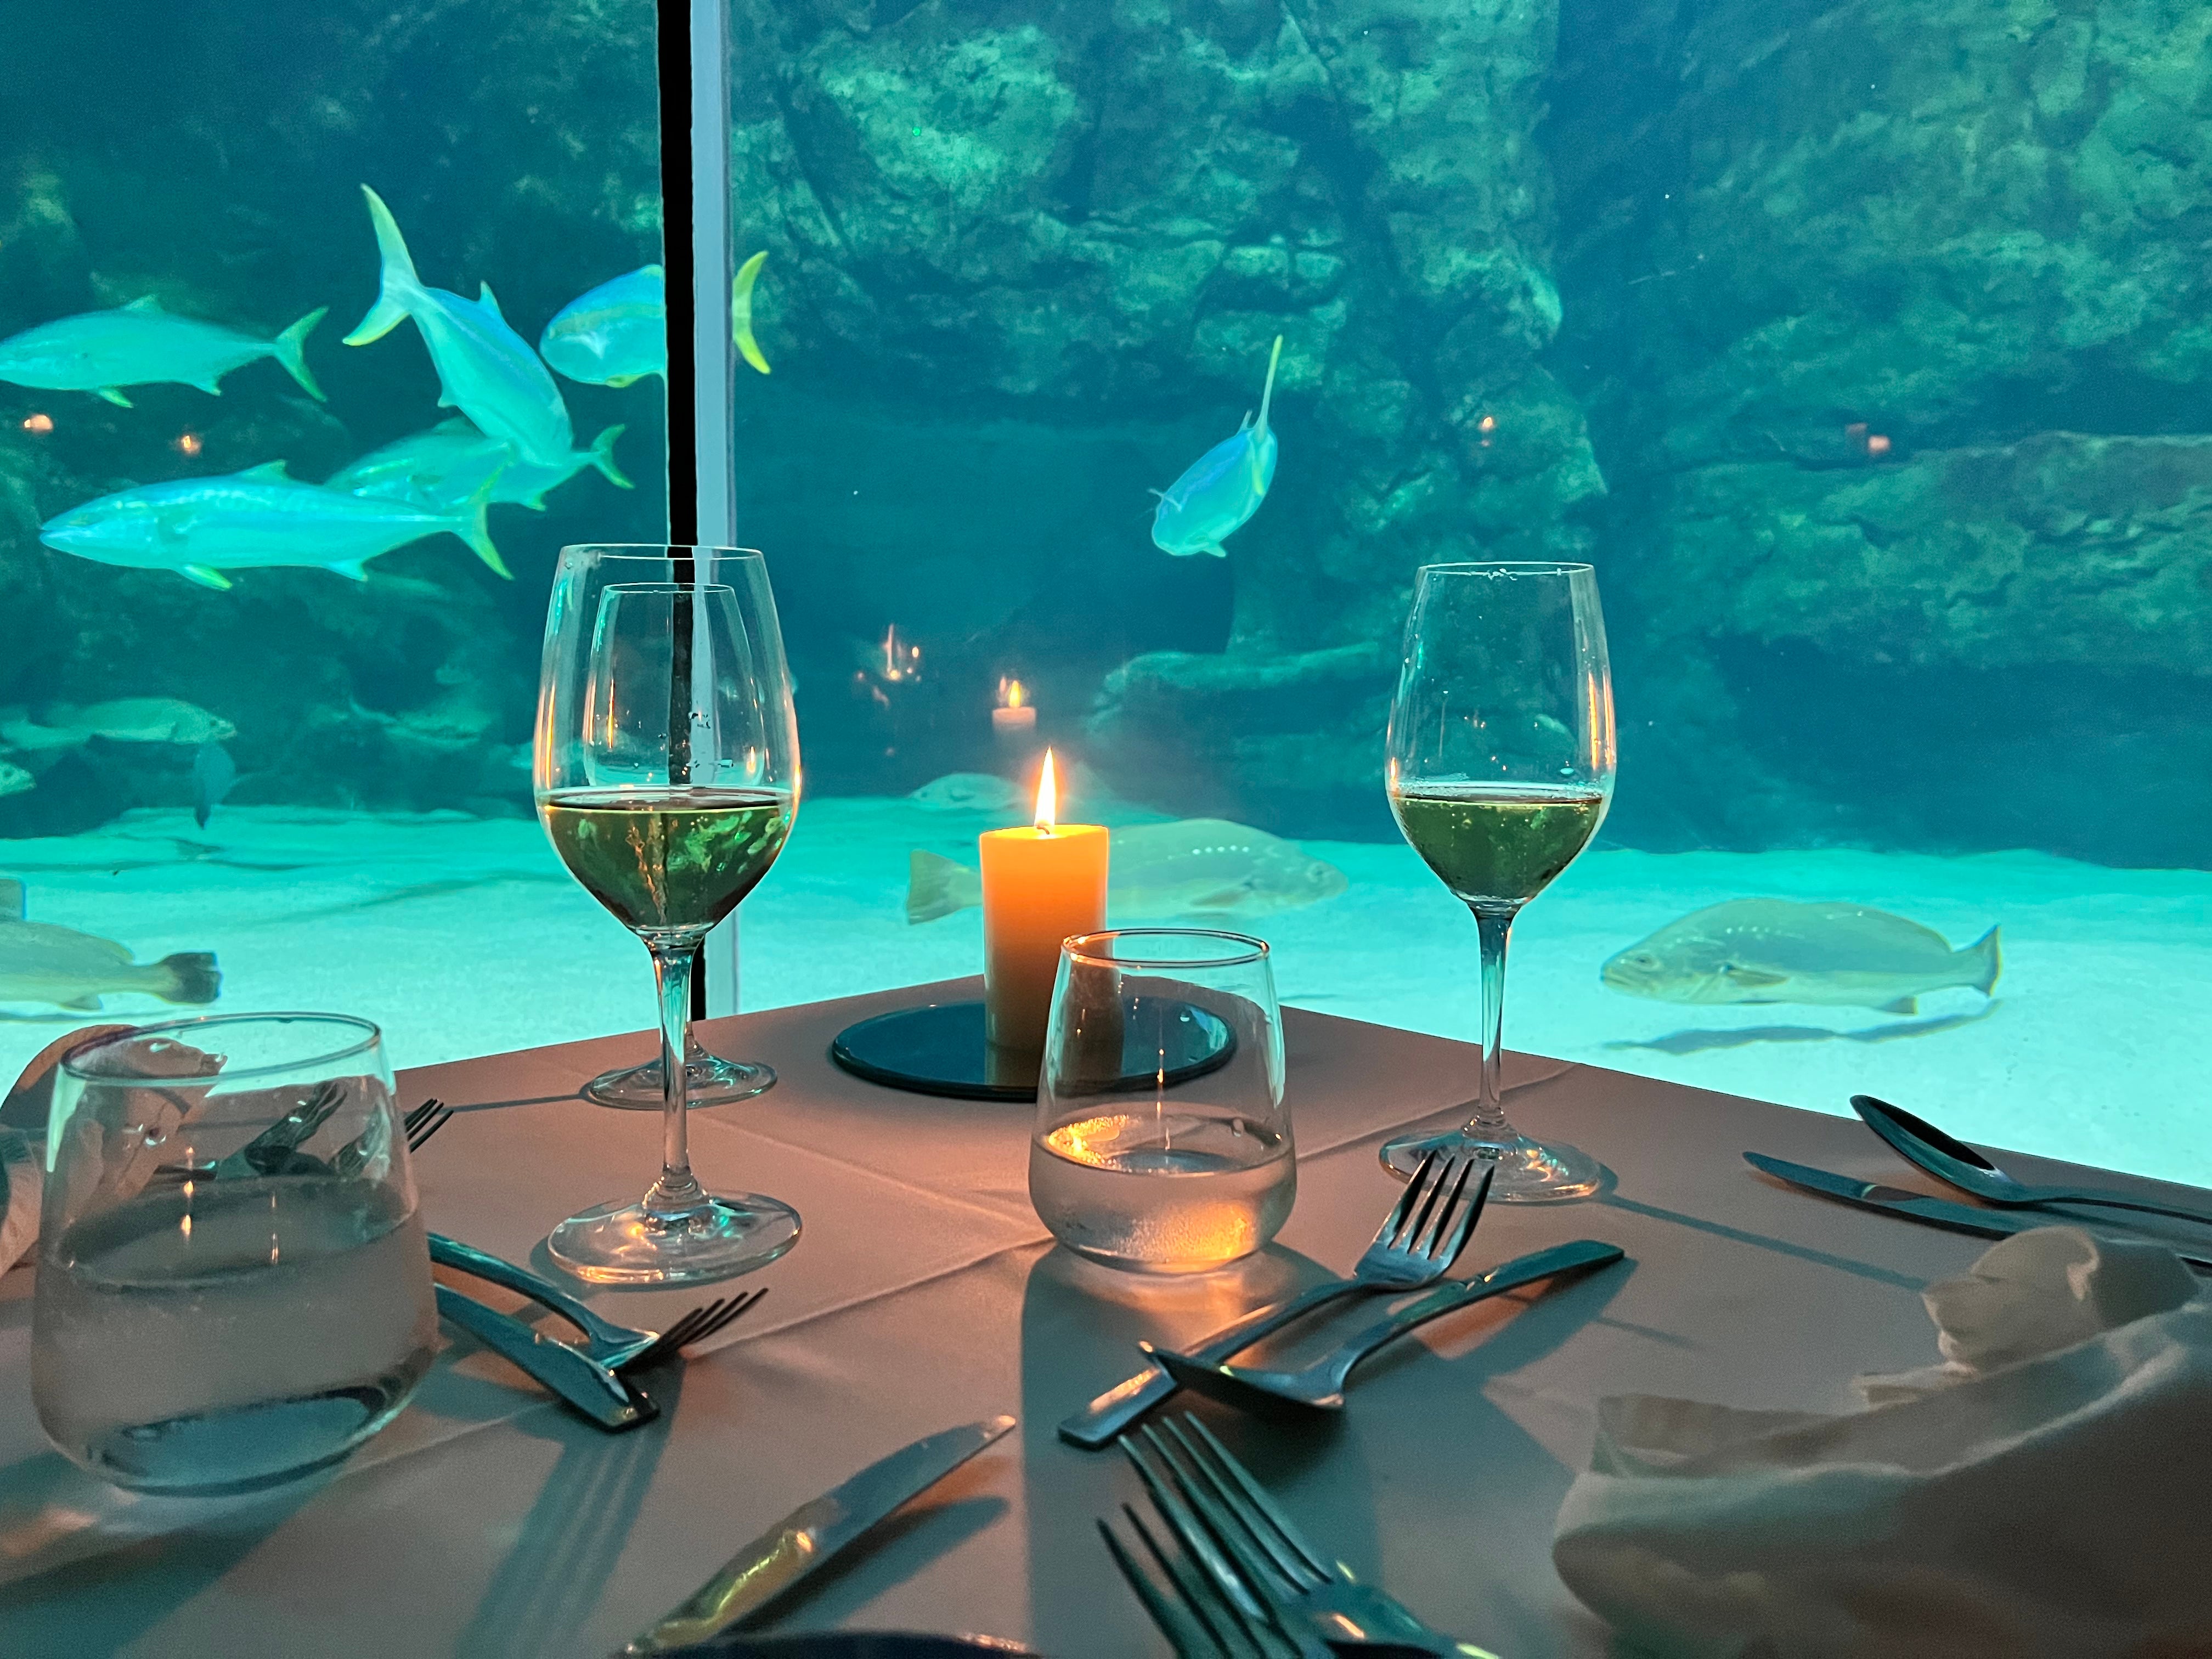 a dinner at the Two Oceans Aquarium in Cape Town